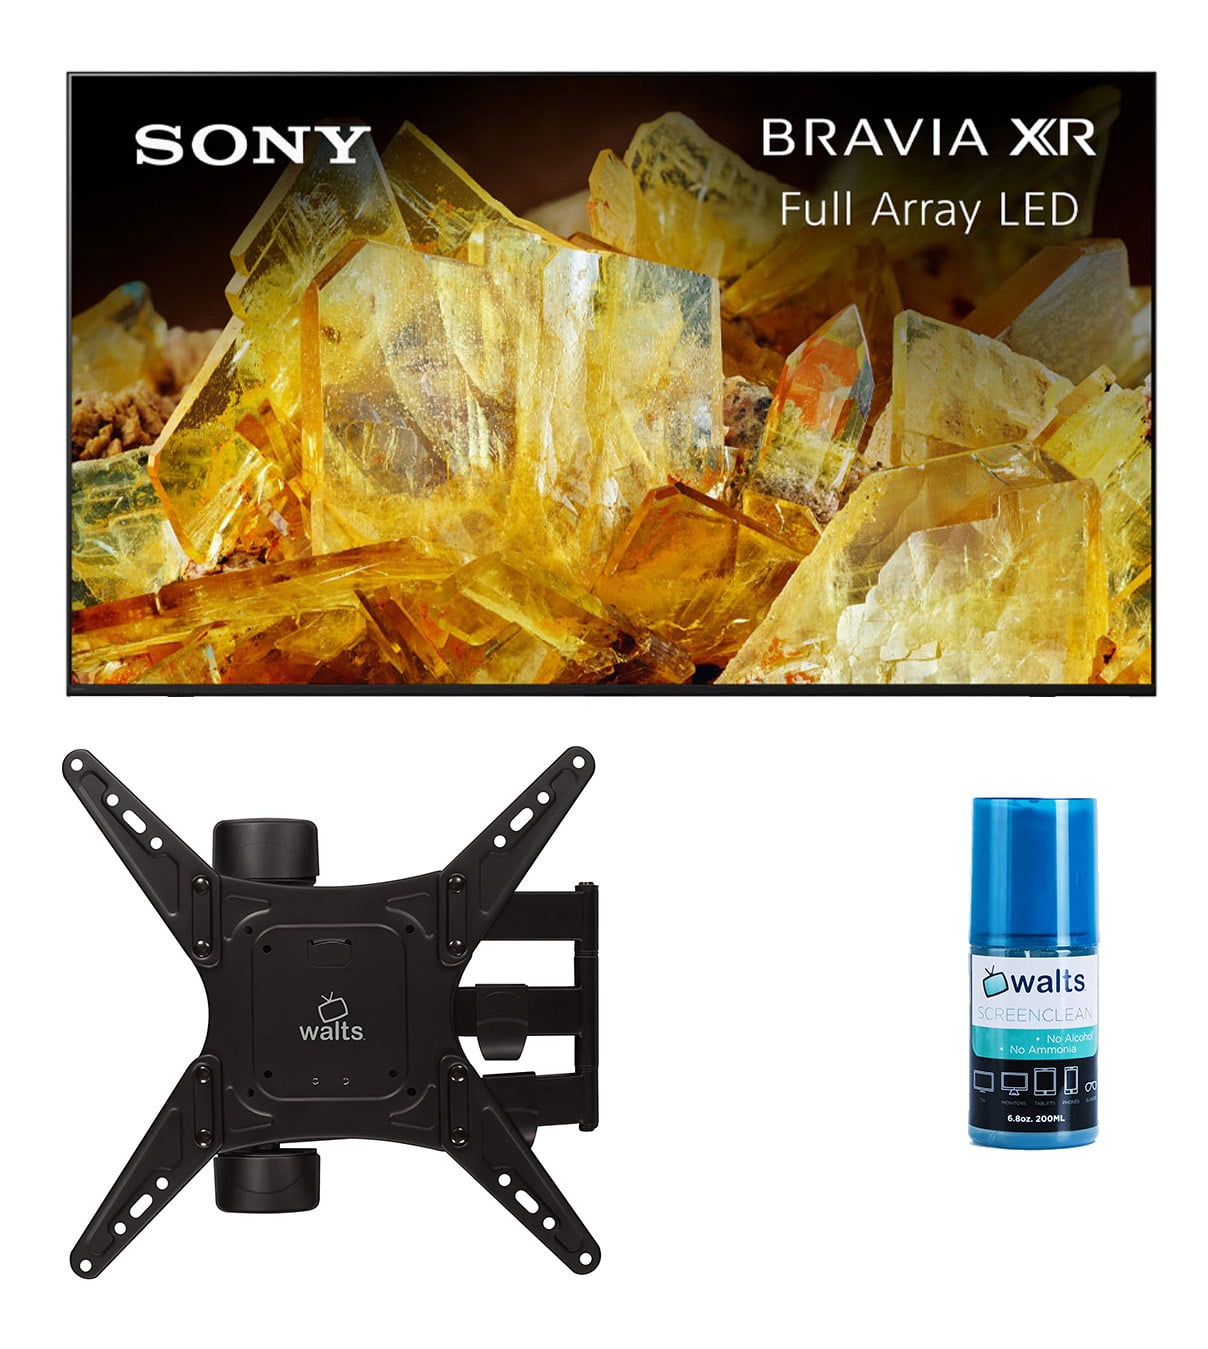 Walts Array Mount Medium XR55X90L TV Motion for a Walts Inch Cleaner TV Screen with Full Inch Sony 55 TV\'s 4K Full BRAVIA LED 32 XR HDTV Google and Smart Compatible Inch-65